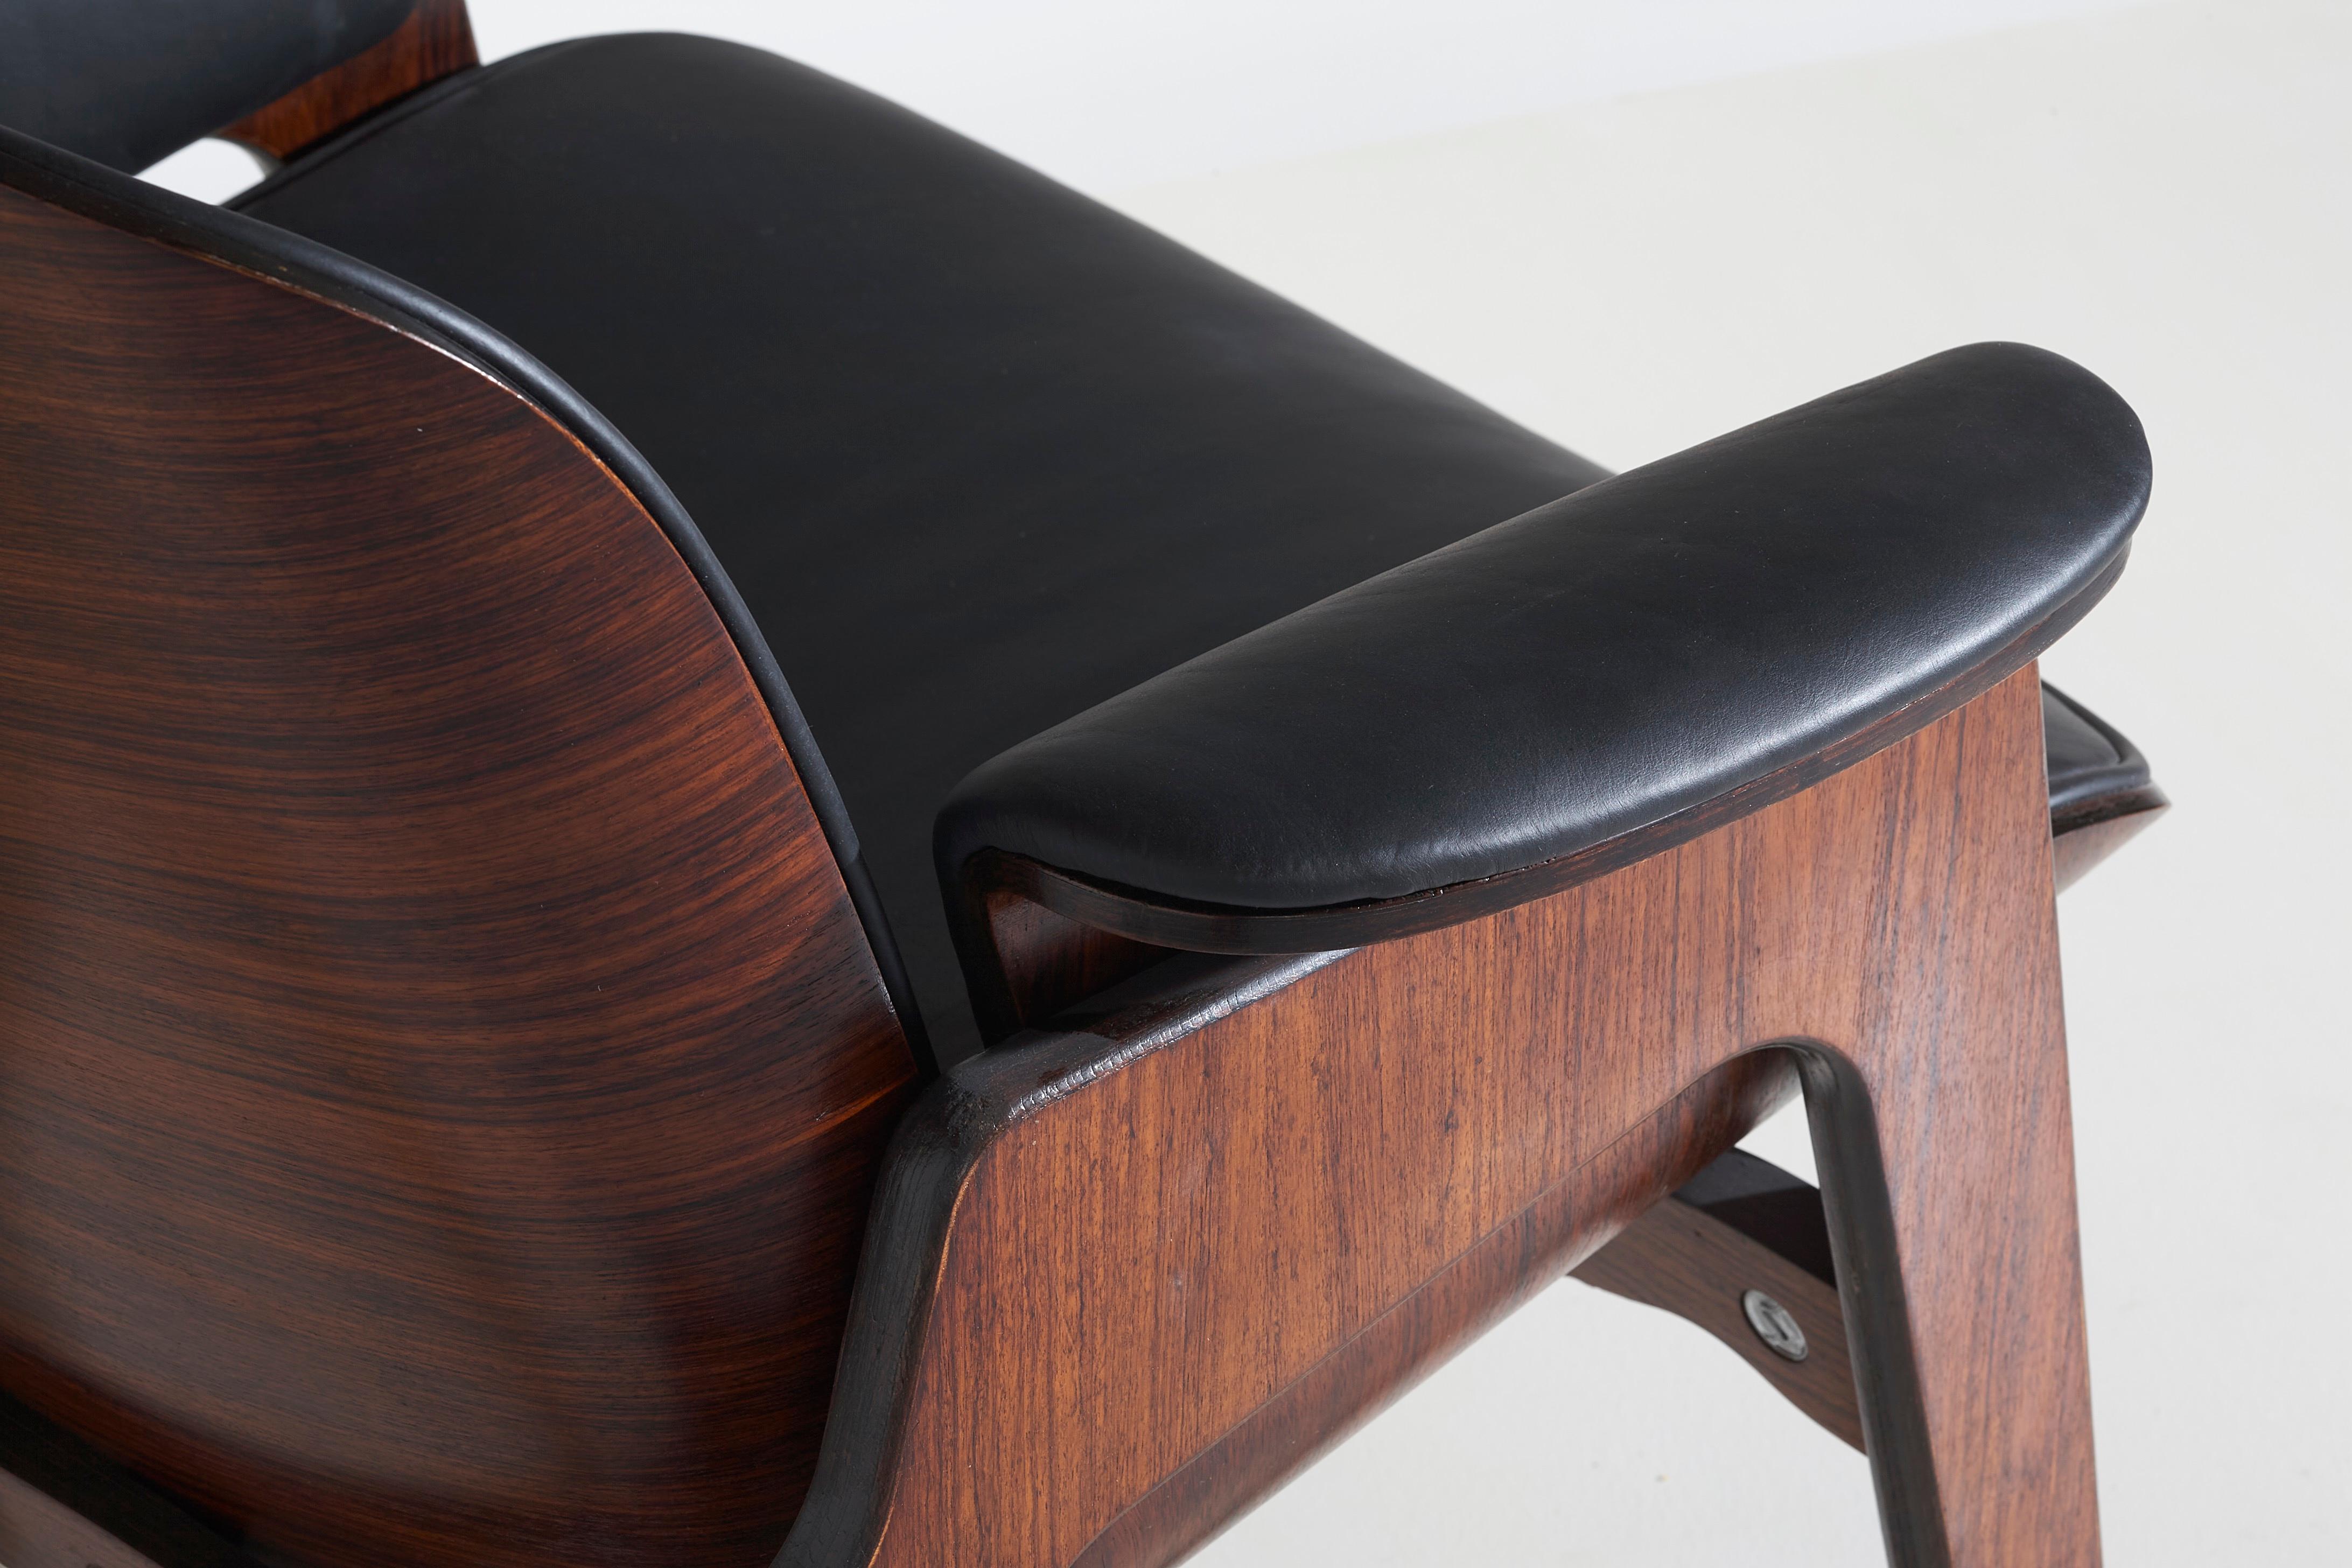 Italian Midcentury Armchair by Ico Parisi for Mim Roma Made by Wood and Black Leather